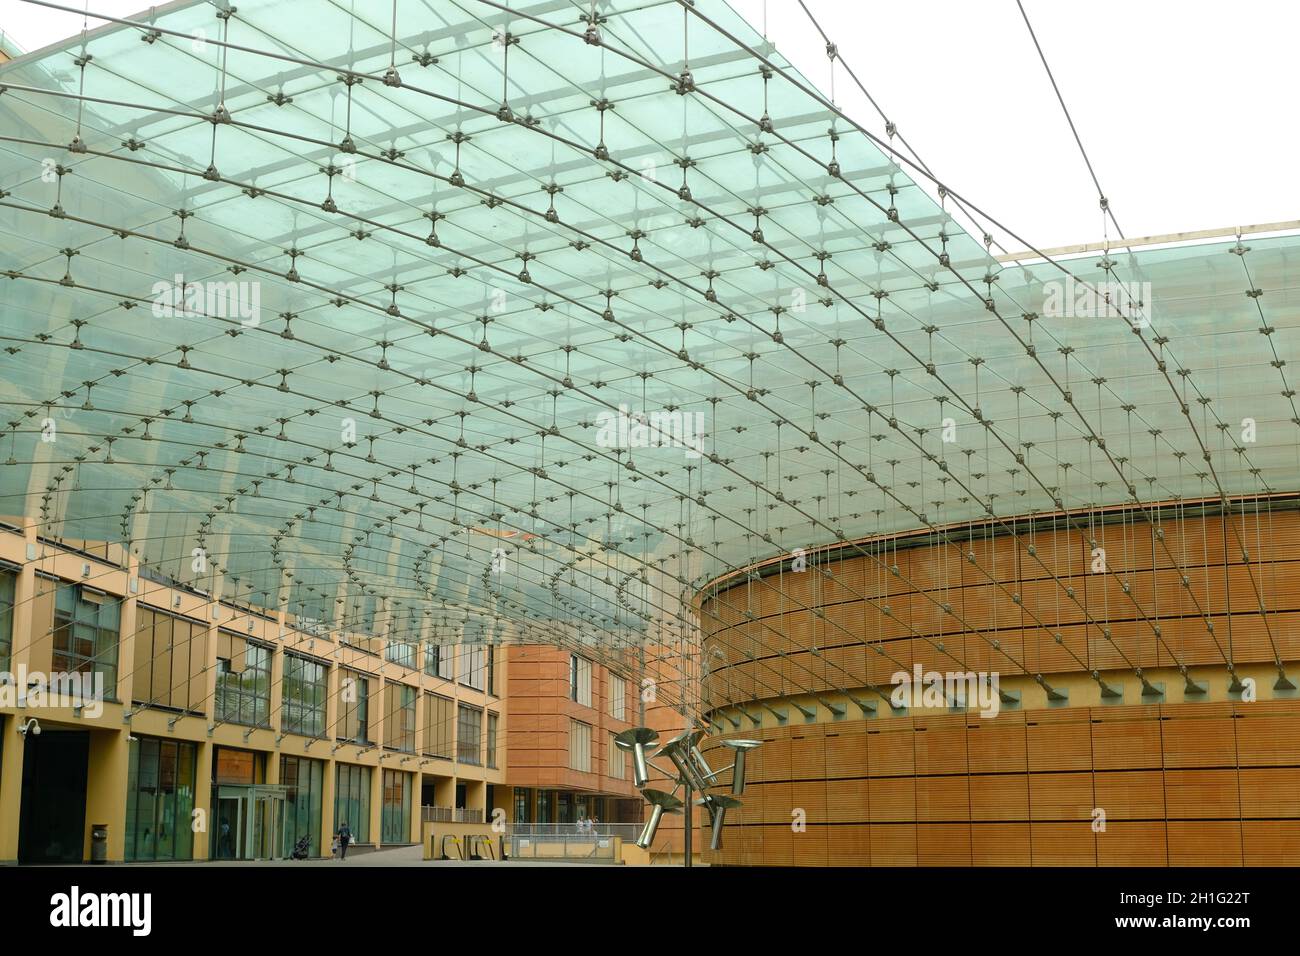 Lodi, Lombardy, Italy about 09-2021. Covered square with glass cover. Banco Popolare Palace in Lodi designed by the architect Renzo Piano. Headquarter Stock Photo